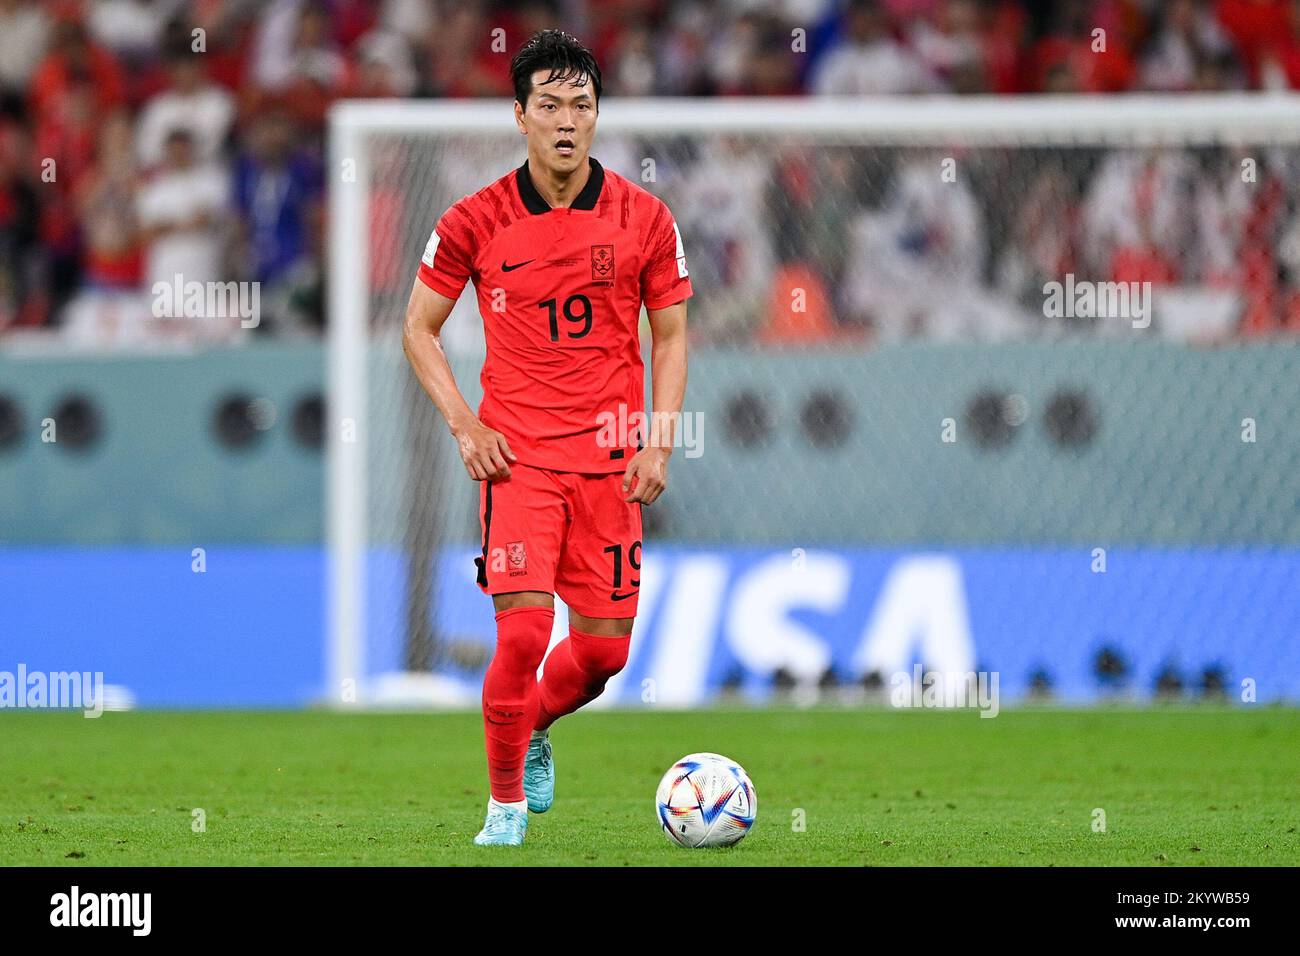 AL KHOR, QATAR - DECEMBER 2: Young Gwon Kim of Korea Republic runs with the ball during the Group E - FIFA World Cup Qatar 2022 match between Costa Rica and Germany at the Al Bayt Stadium on December 2, 2022 in Al Khor, Qatar (Photo by Pablo Morano/BSR Agency) Stock Photo